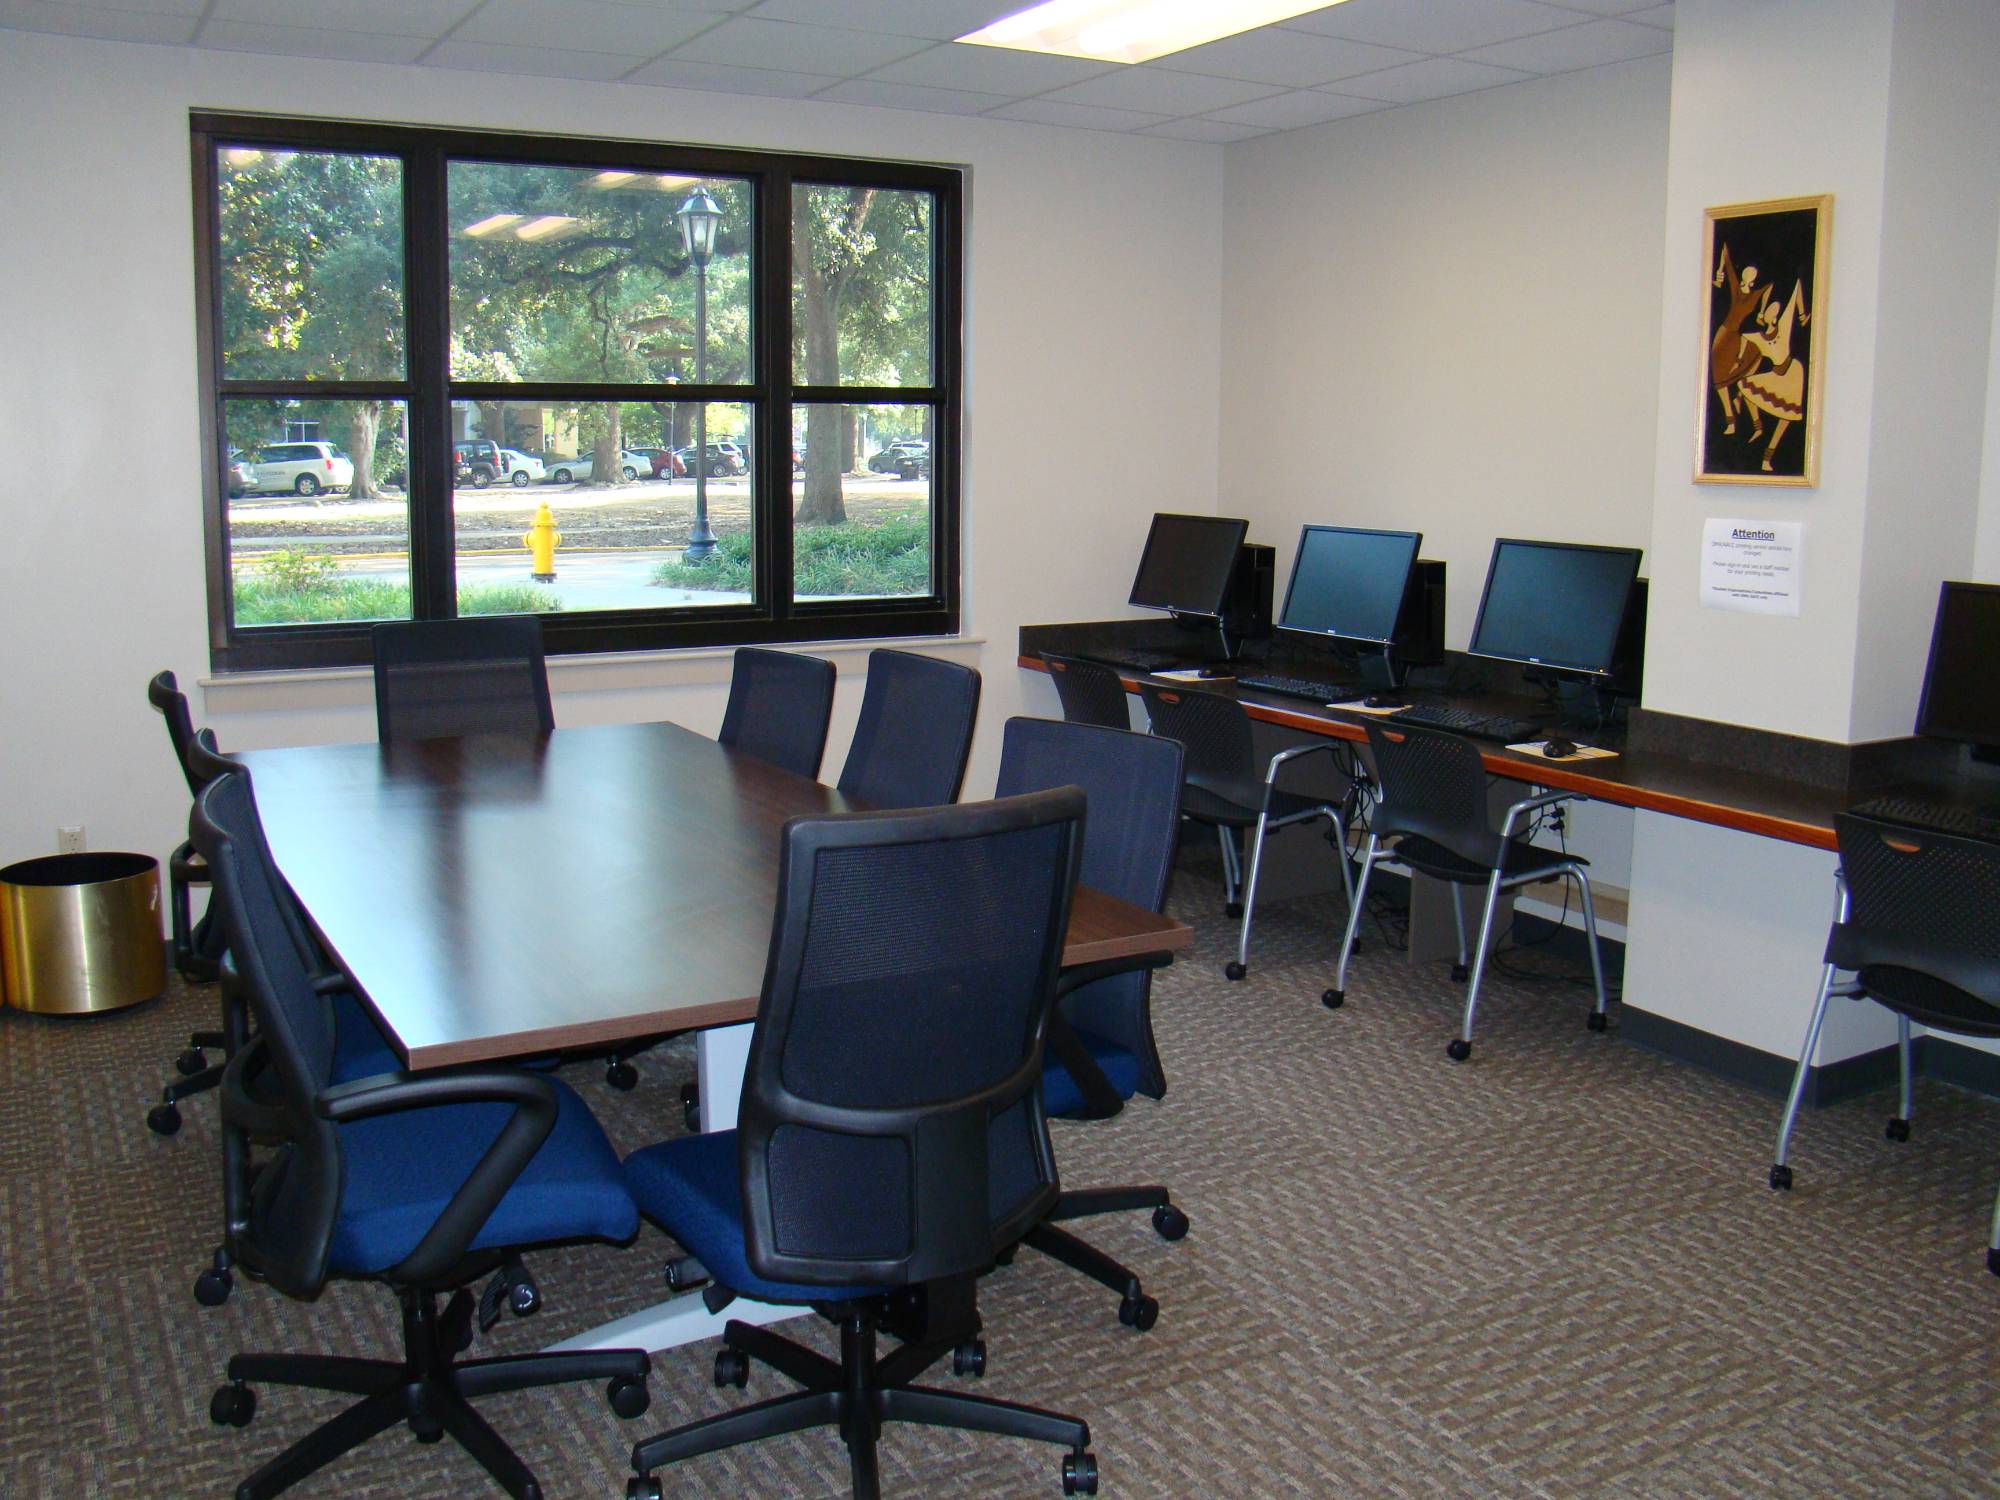 View of conference room